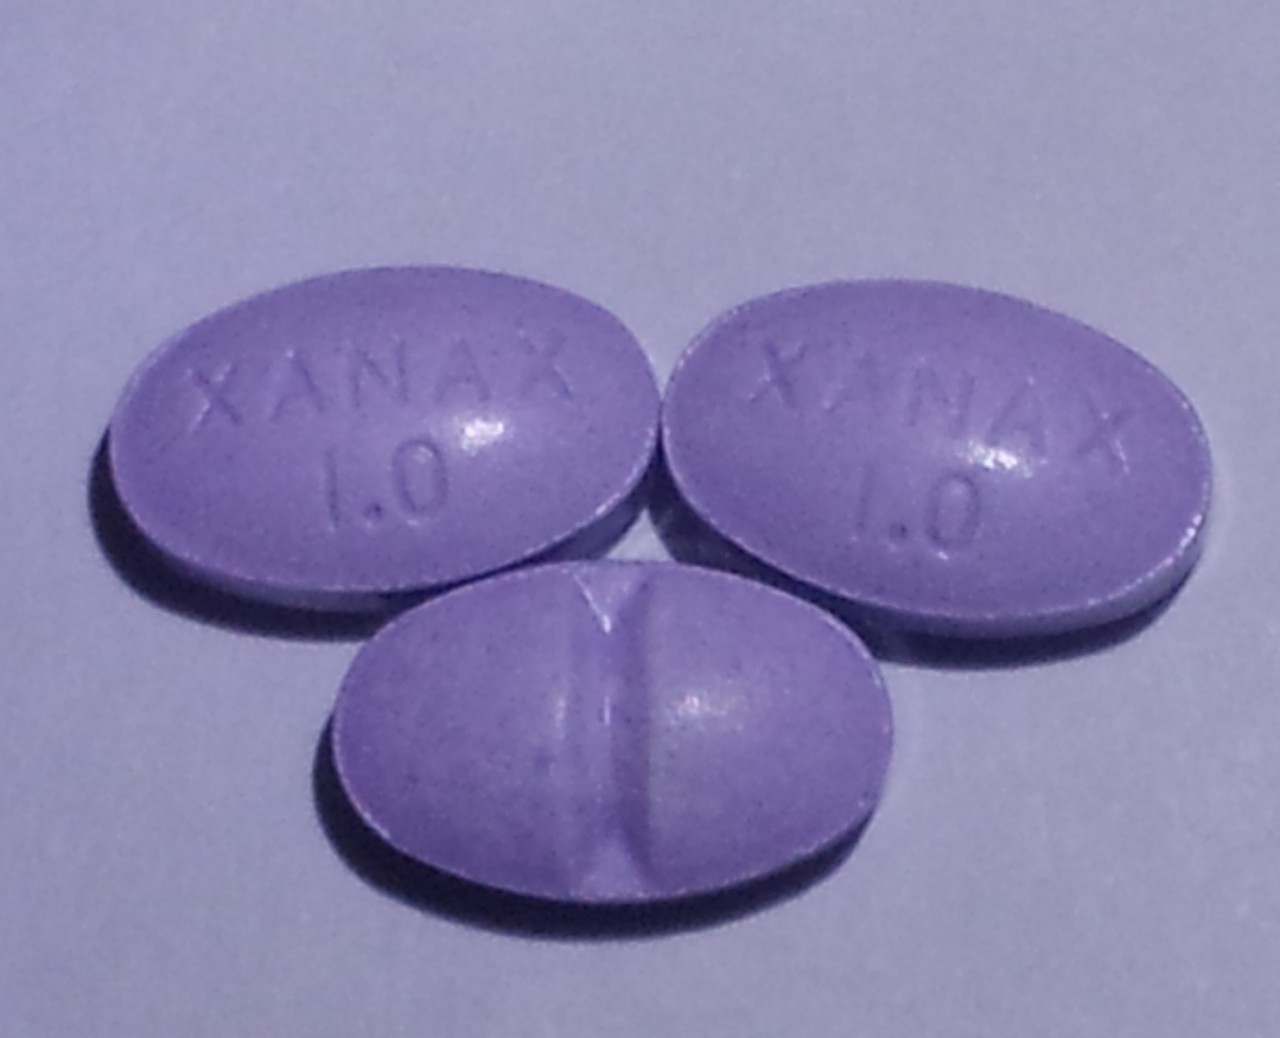 Buy Xanax 1mg Online Without Prescription with discount